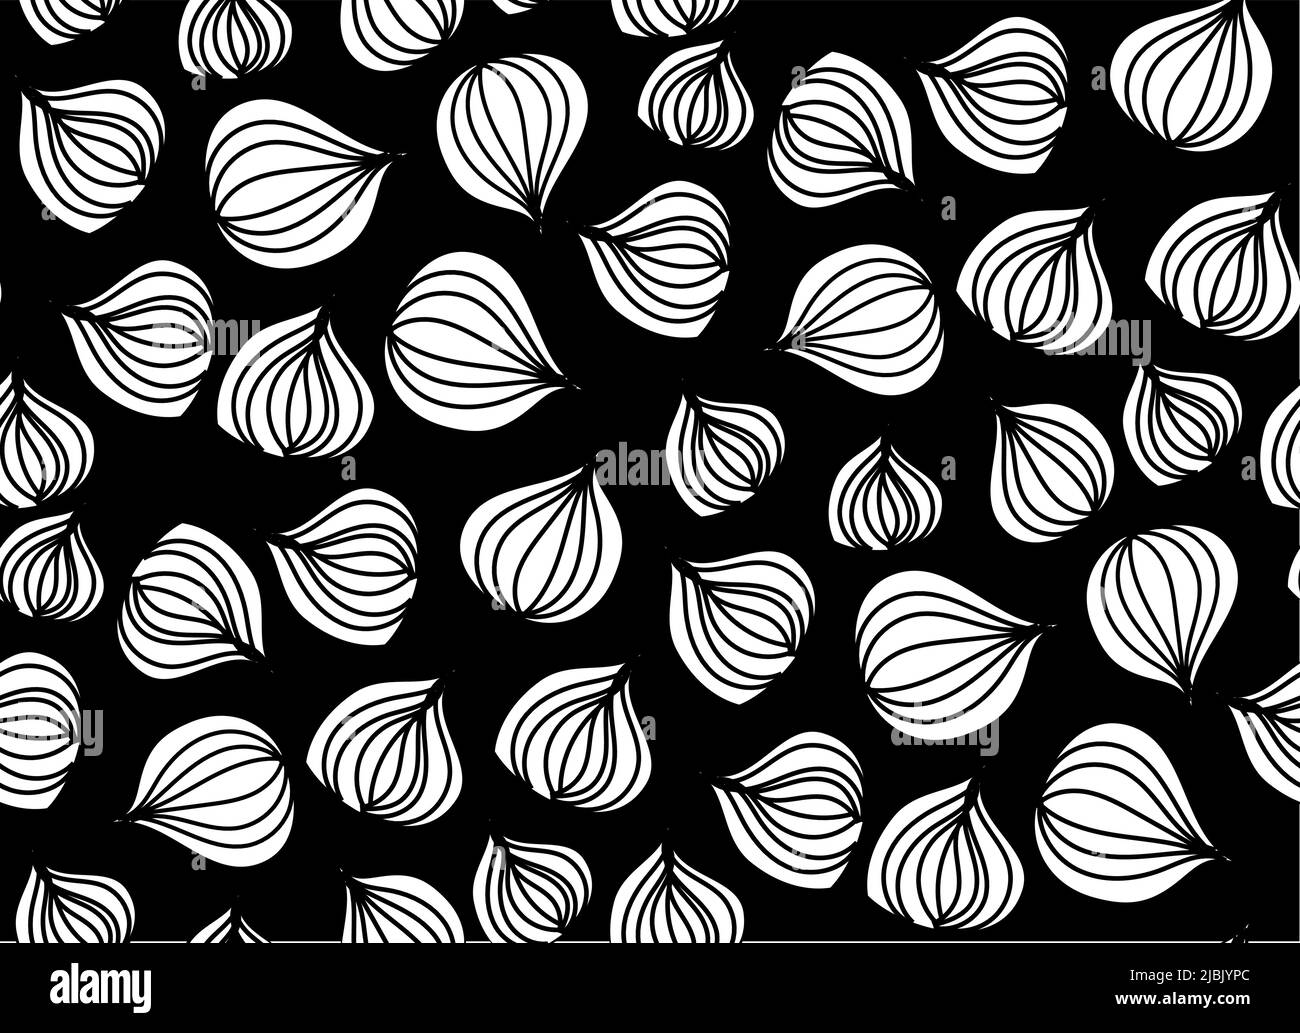 Floral vector seamless pattern with hand drawn black flowers on colorful leaves - Moire outline illustration Stock Vector